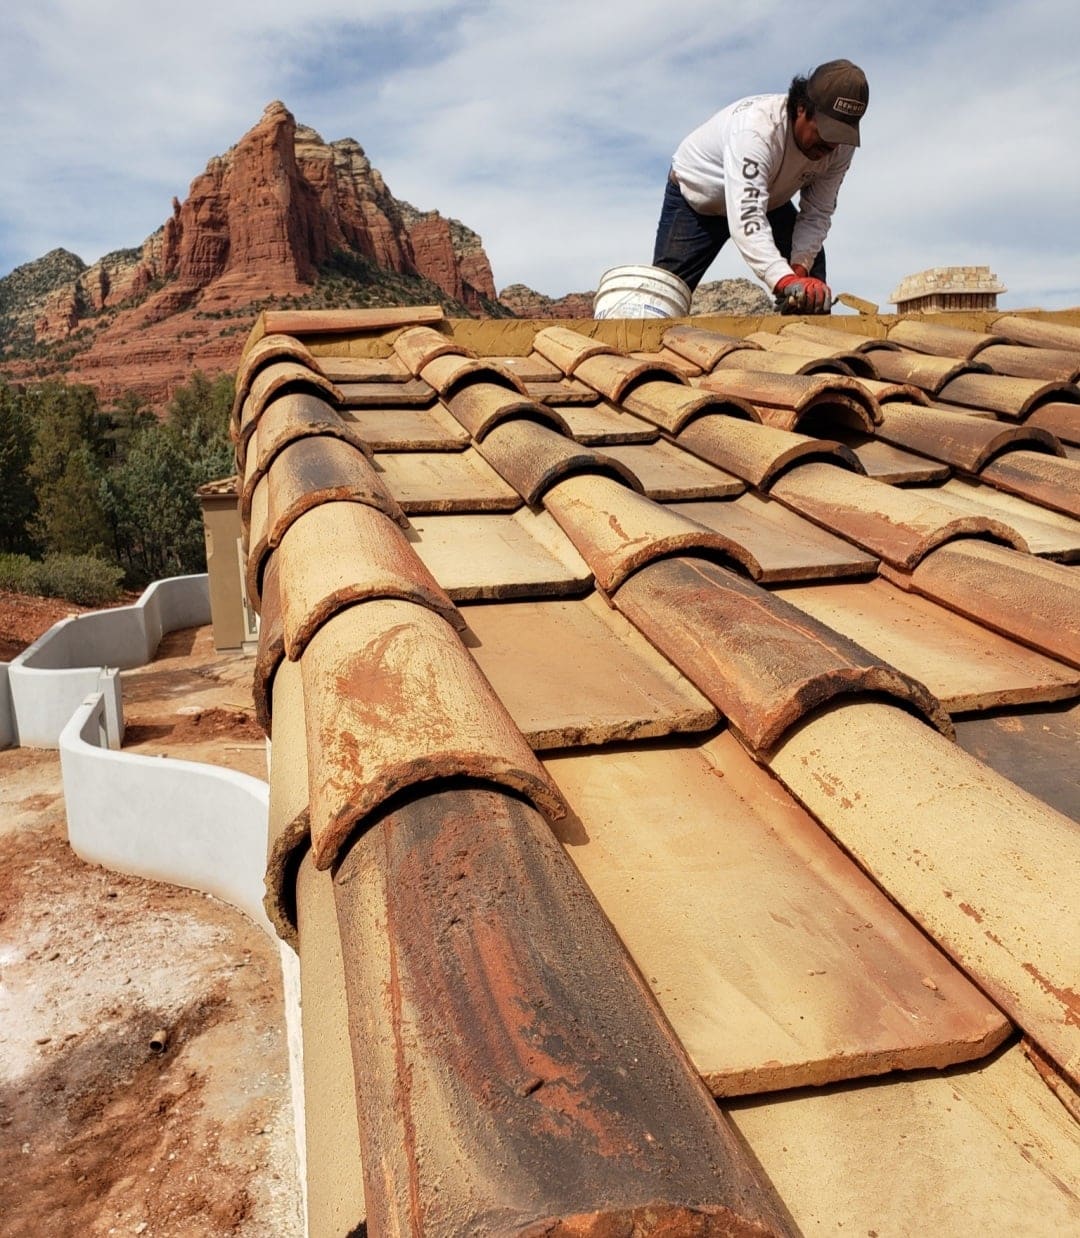 A man working on a tile roof in Tempe, Arizona.